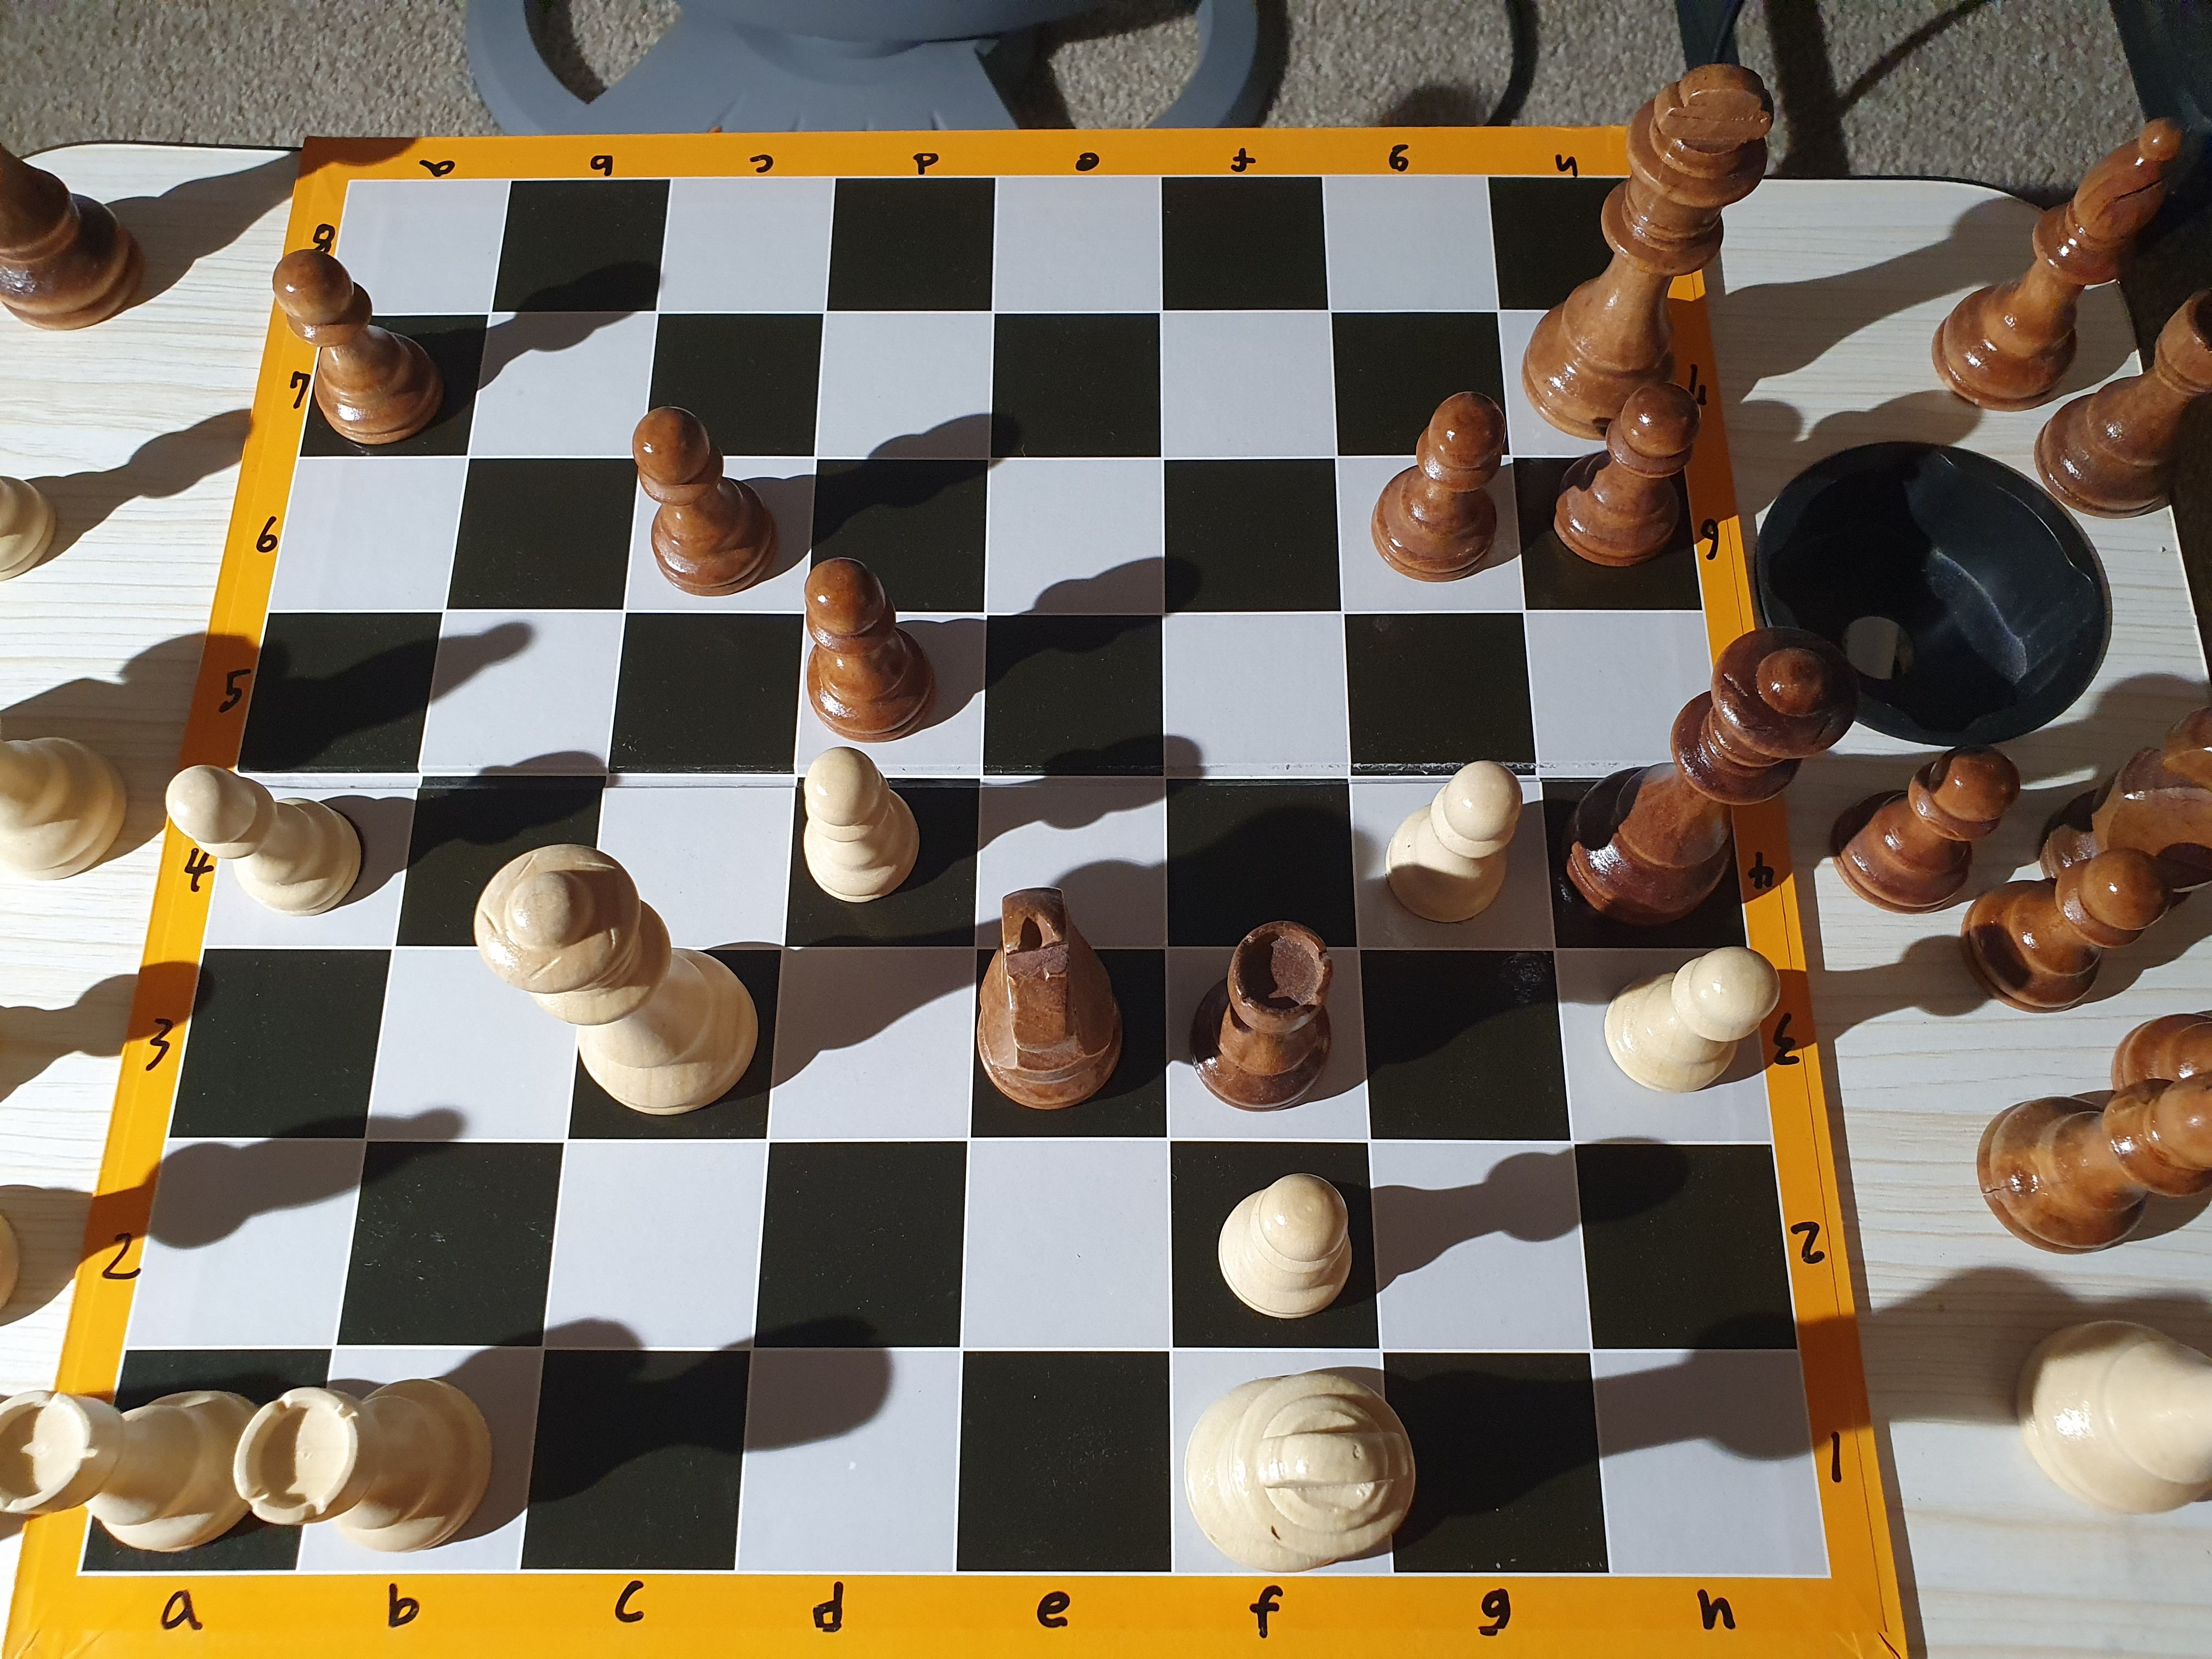 Did I come up with the best chess opening? - Chess Forums 